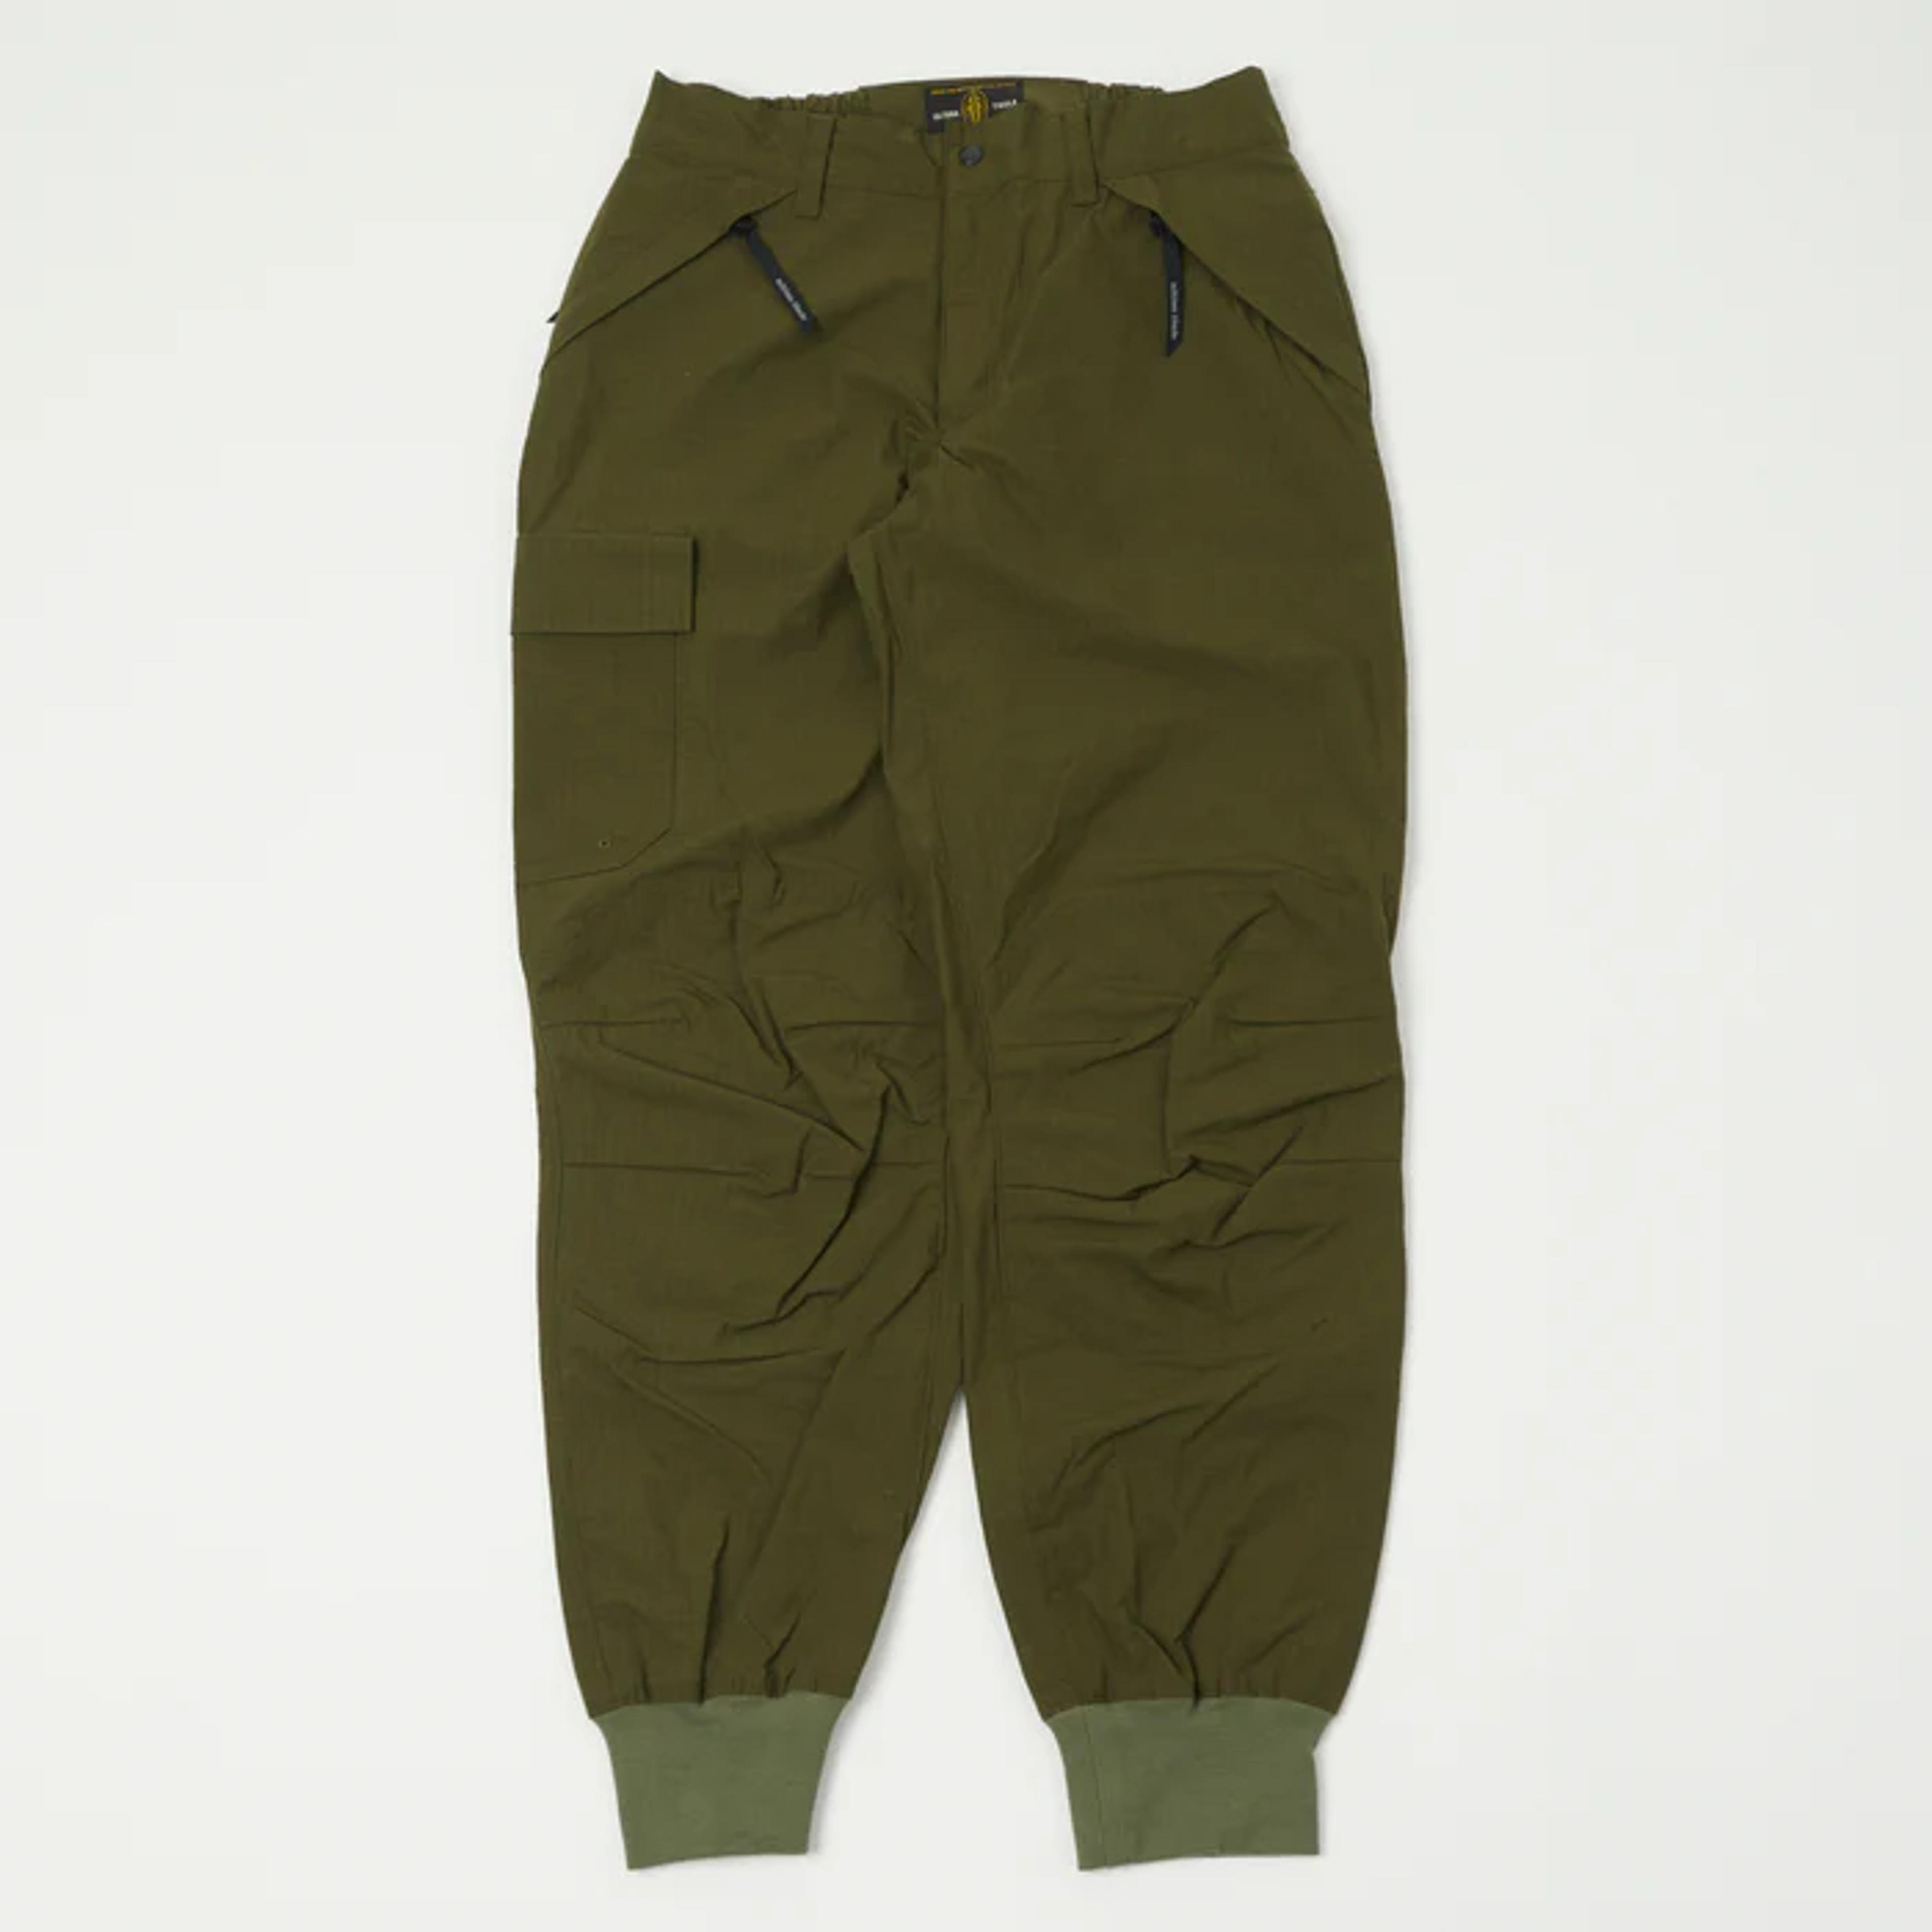 Freewheelers 'All-Arounder' Gen-III Pant - Khaki Olive | SON OF A STAG